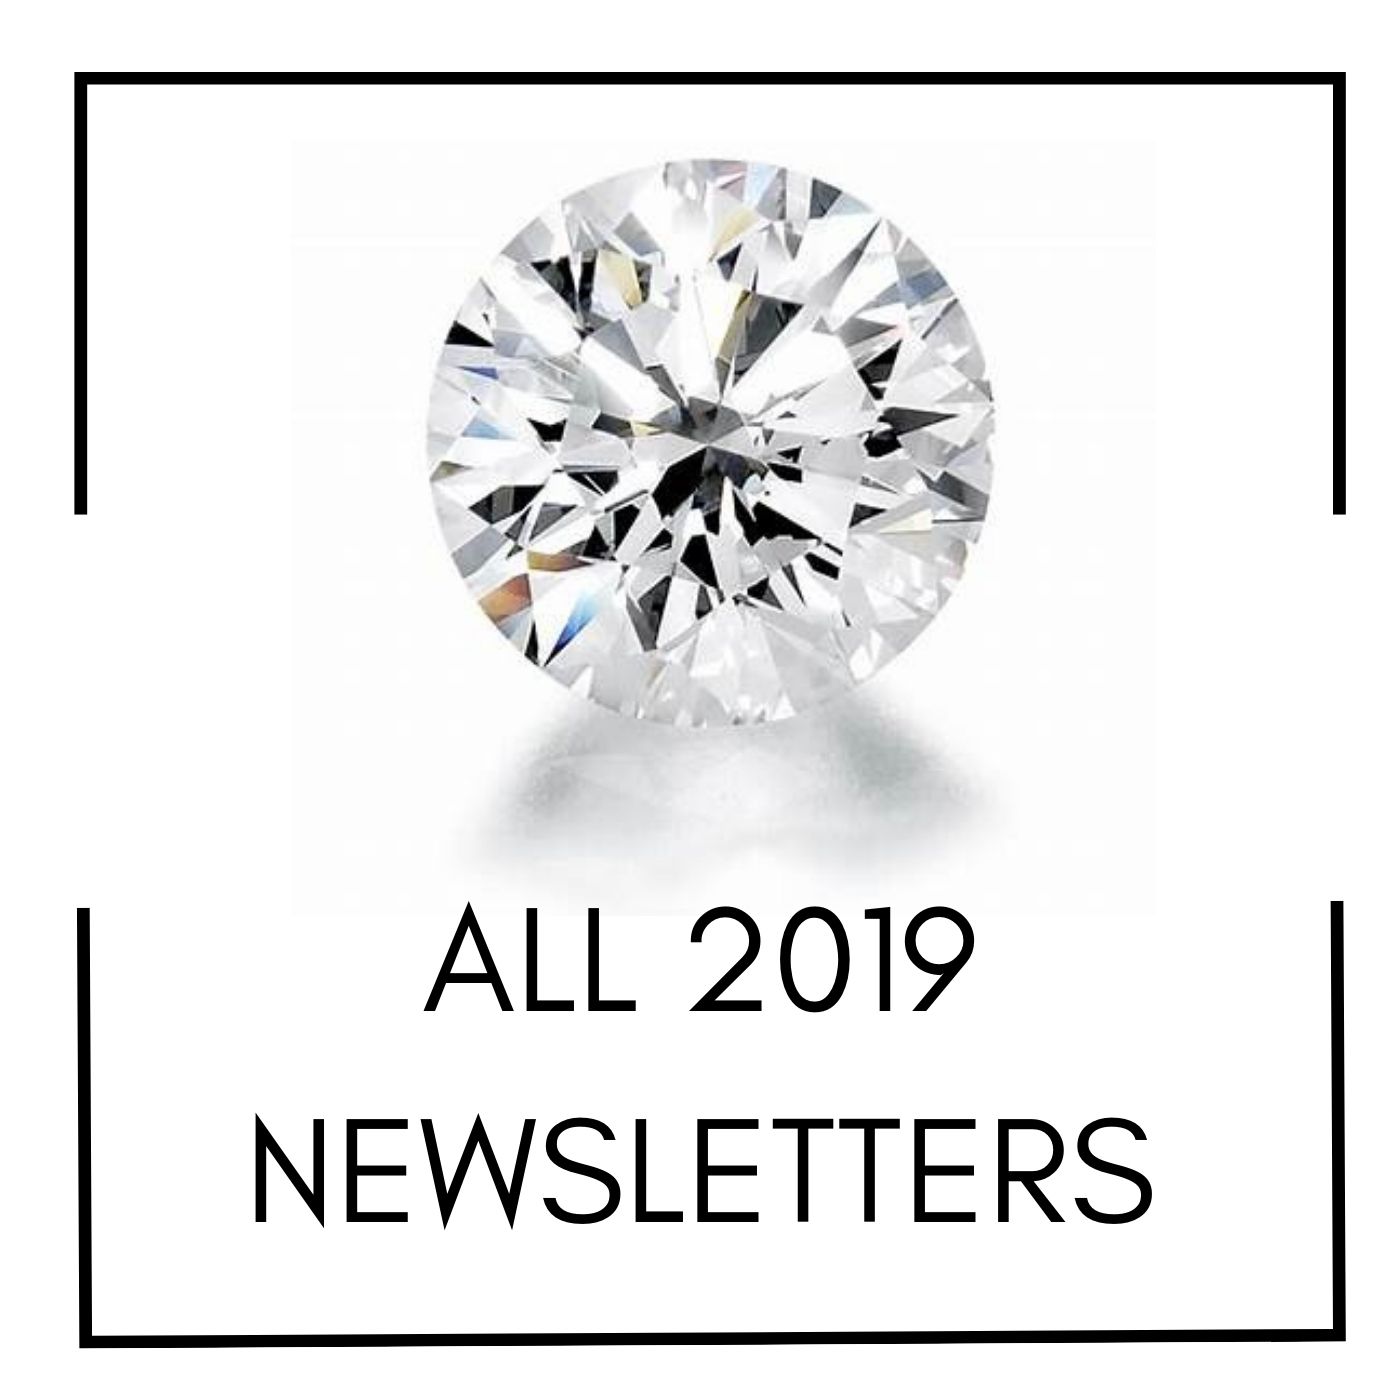 All 2019 Newsletters